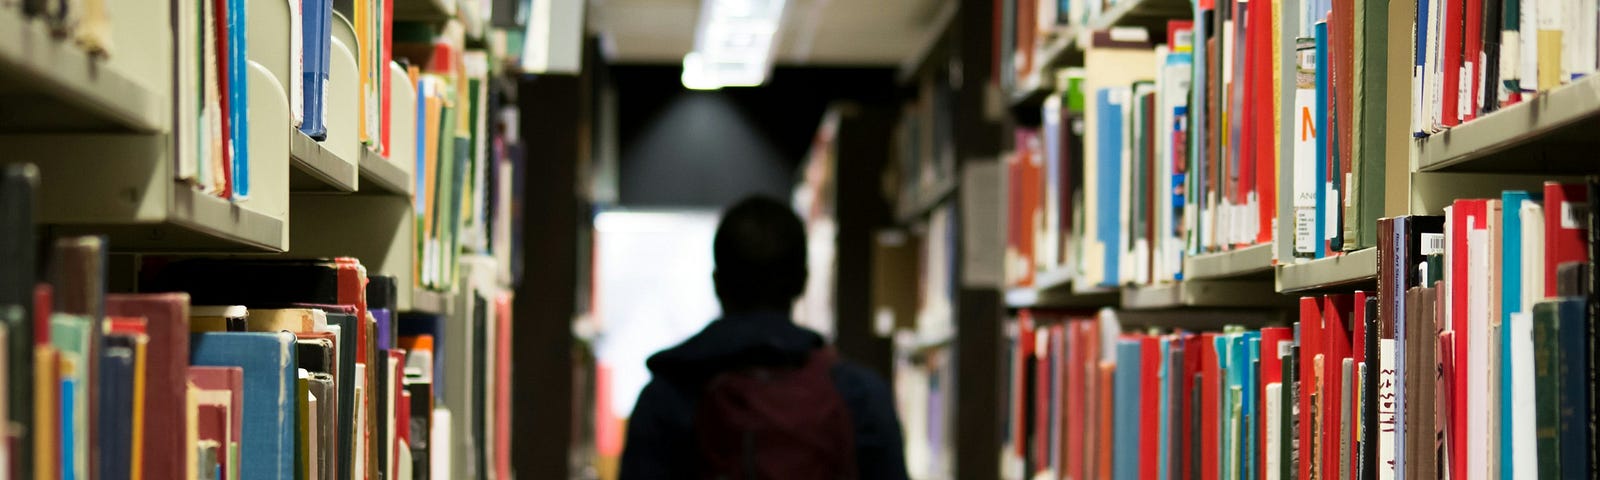 Image of a student walking through a school library